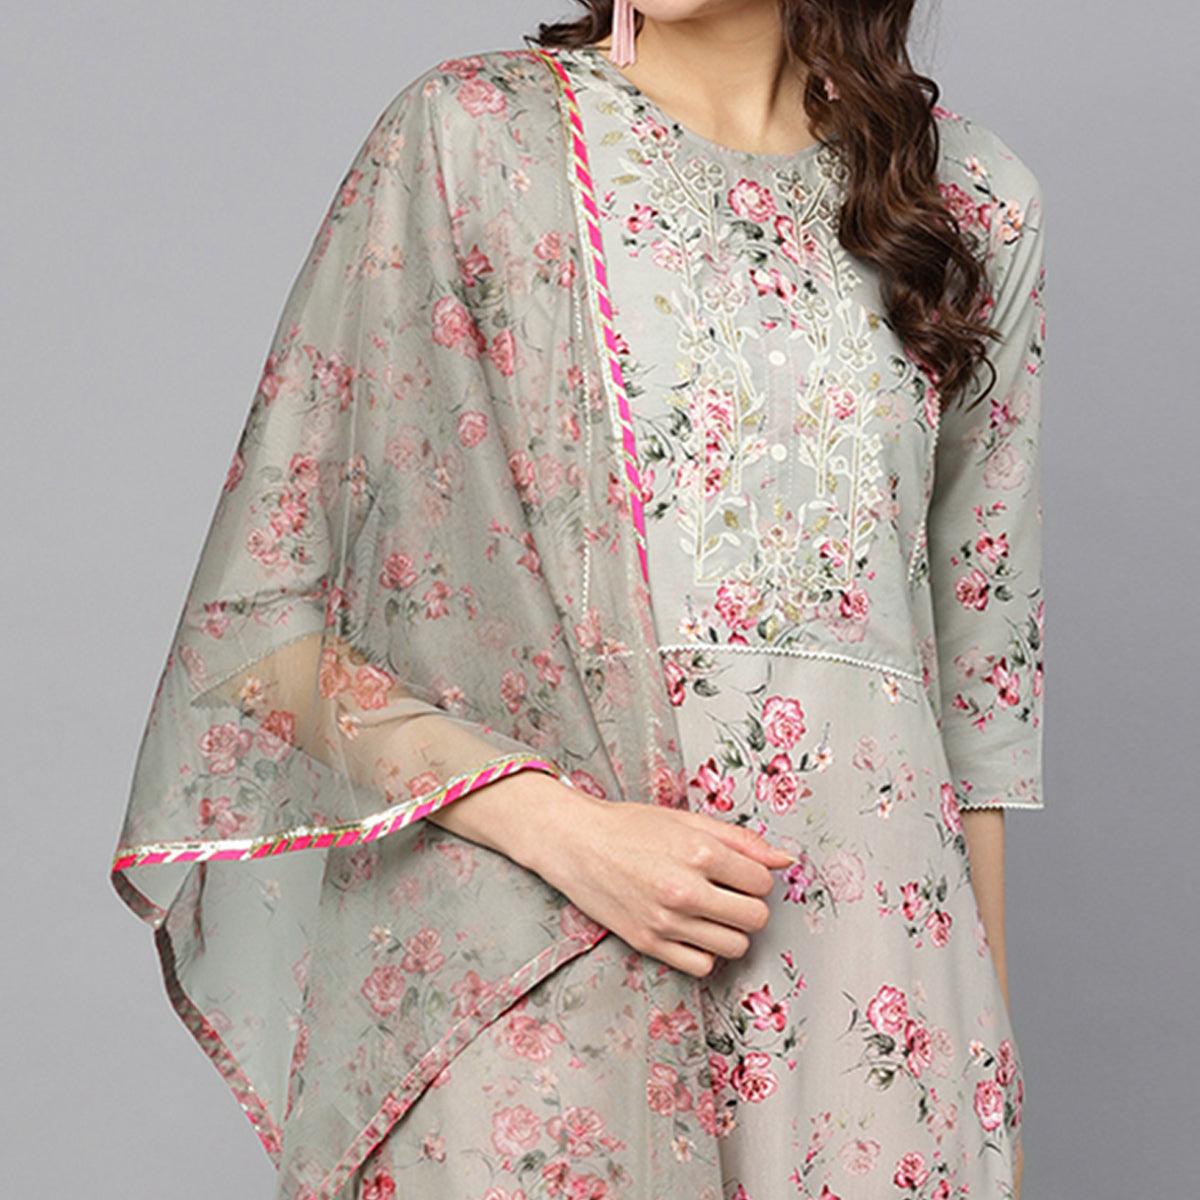 Graceful Grey Colored Party Wear Floral Digital Printed Cotton Kurti With Dupatta - Peachmode